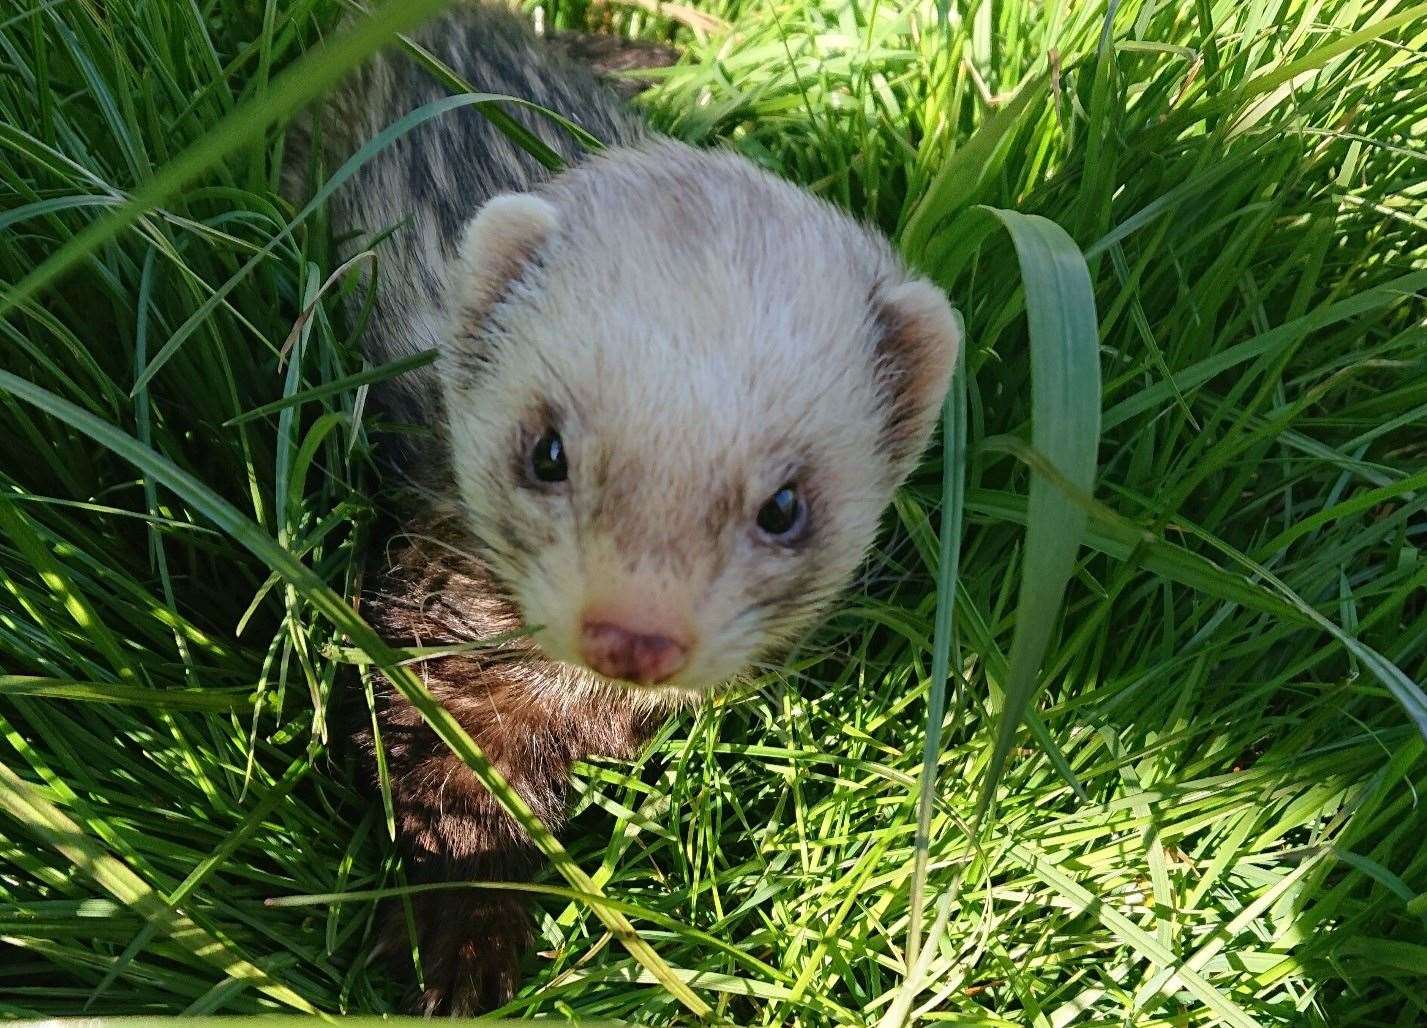 Have you seen - or been offered - the missing ferrets? Pictured is Boris